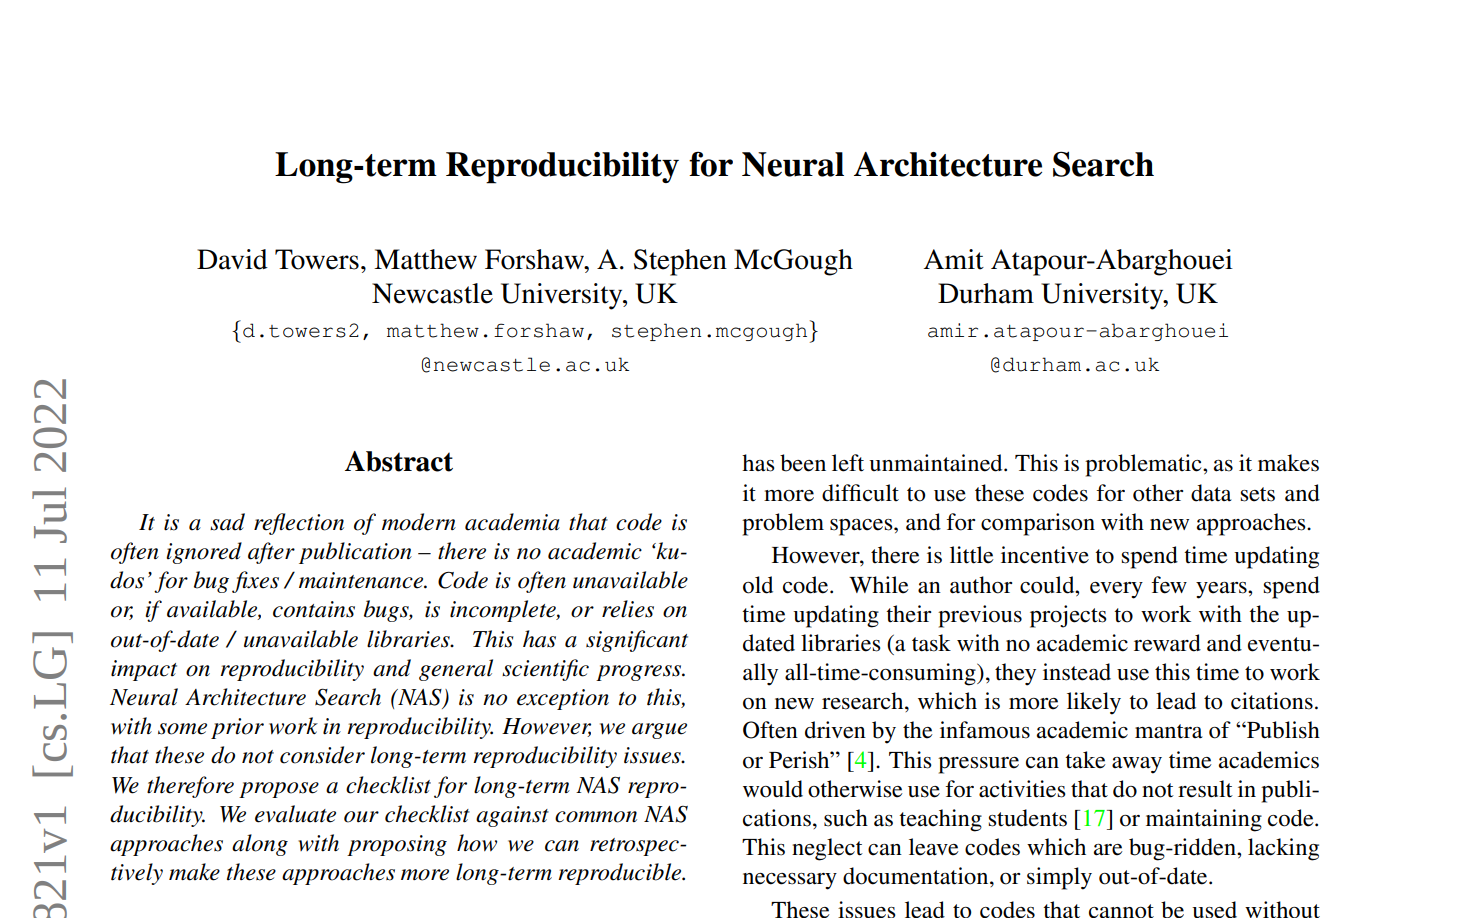 A screenshot of our Long-term Reproducibility for Nueral Architecture Search Paper